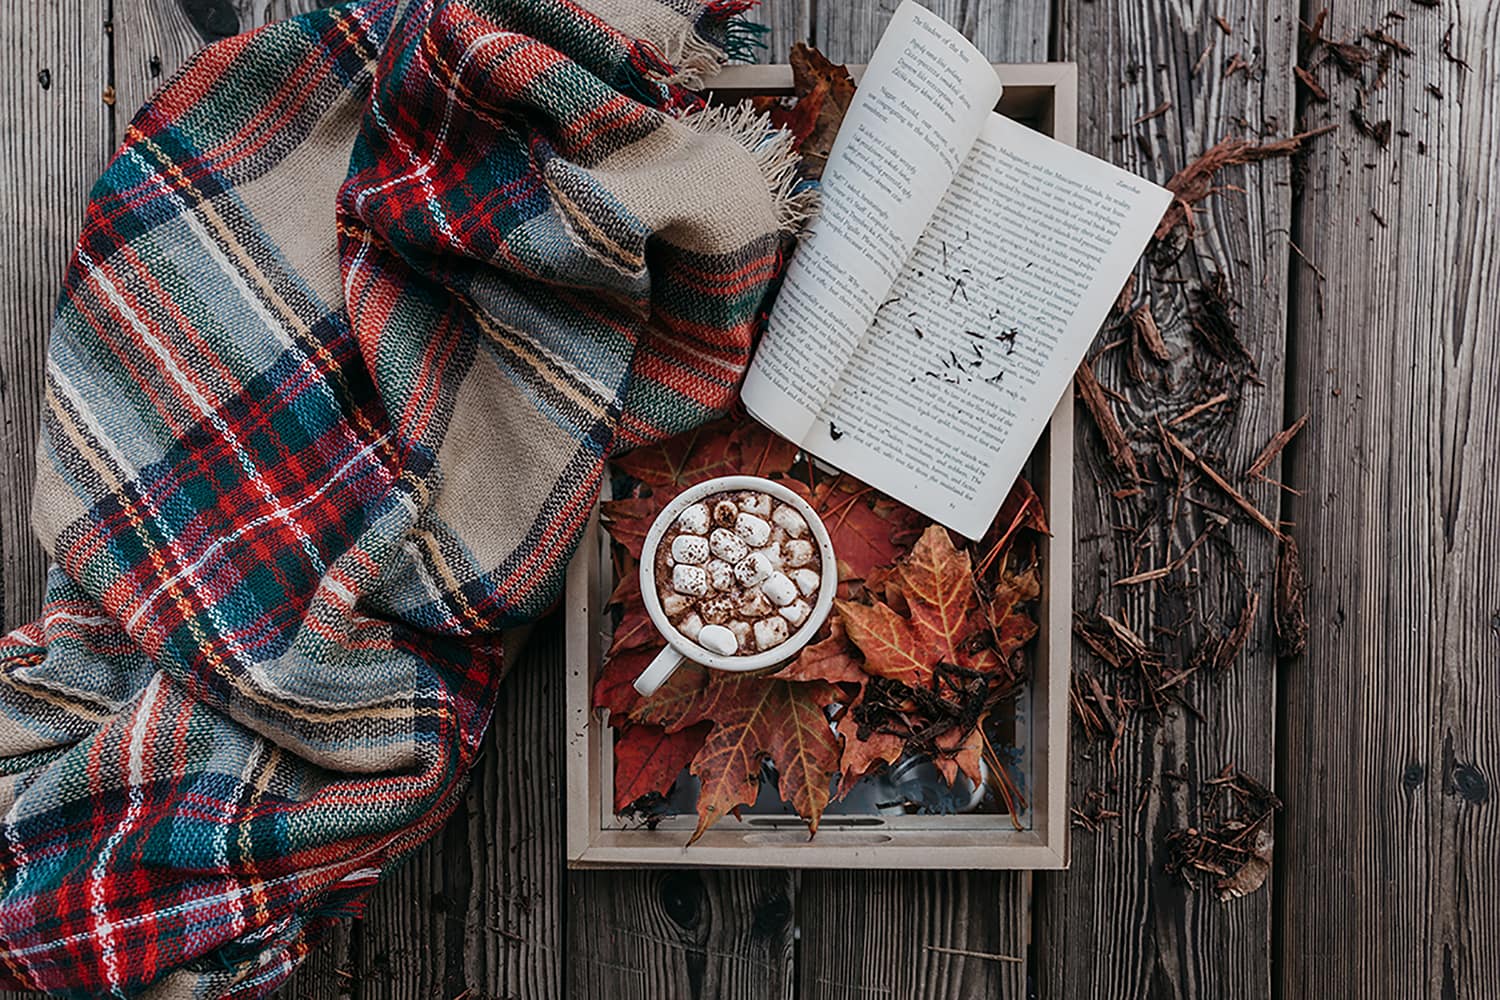 Season Your Instagram With These Fall Hashtags!